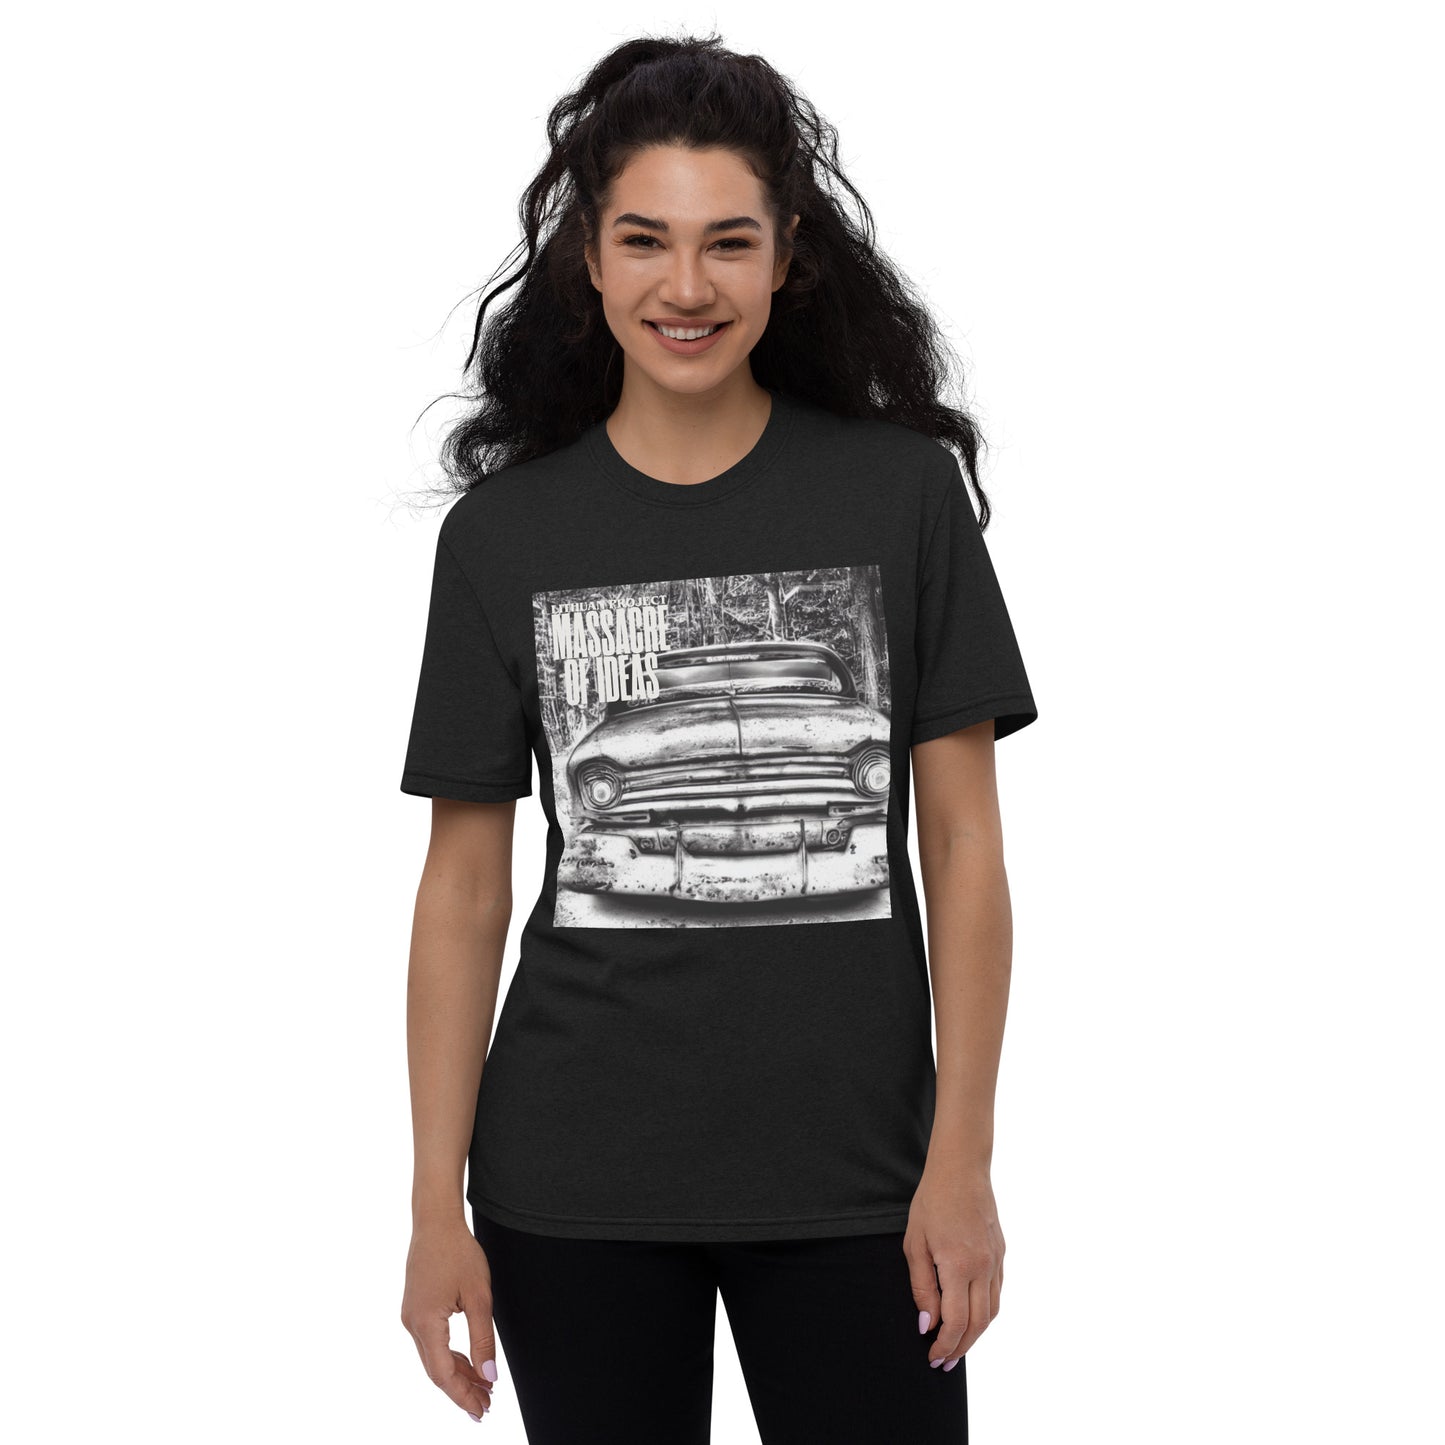 Ride With Me unisex recycled t-shirt